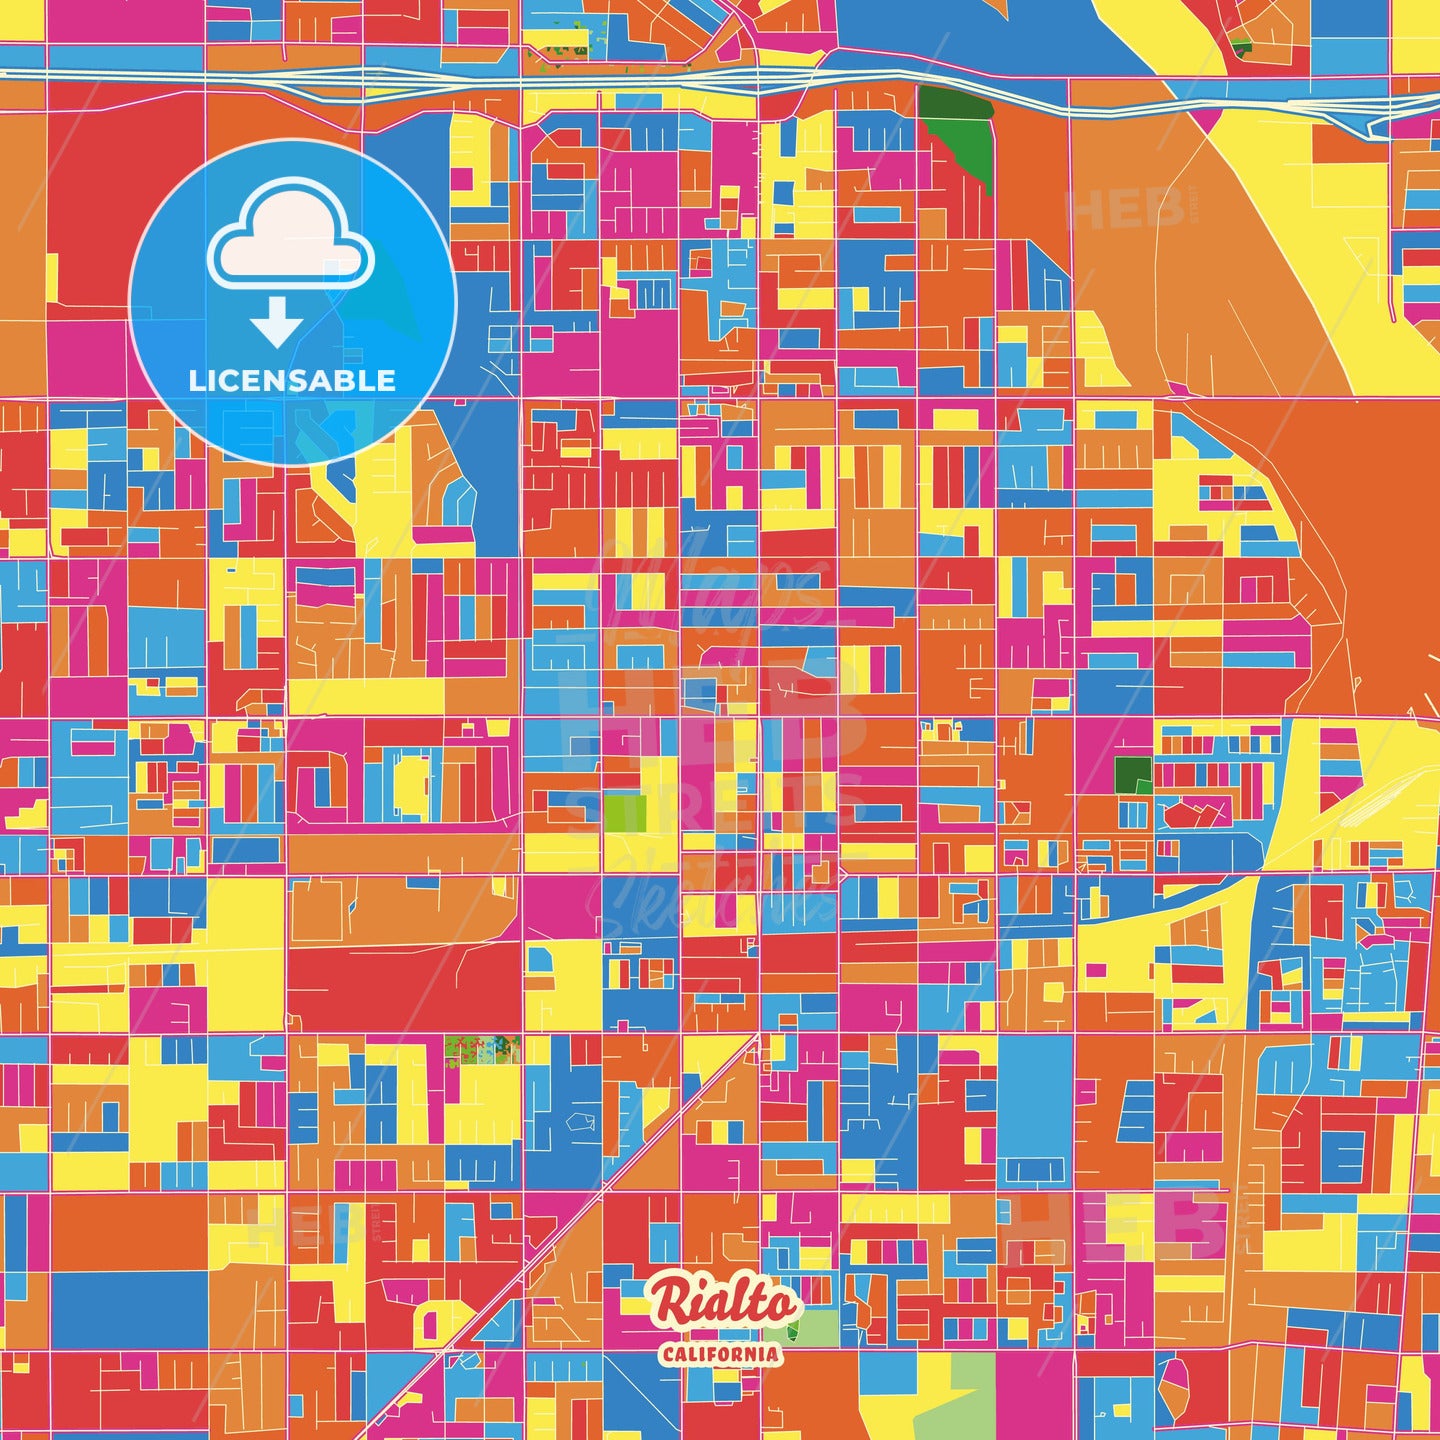 Rialto, United States Crazy Colorful Street Map Poster Template - HEBSTREITS Sketches